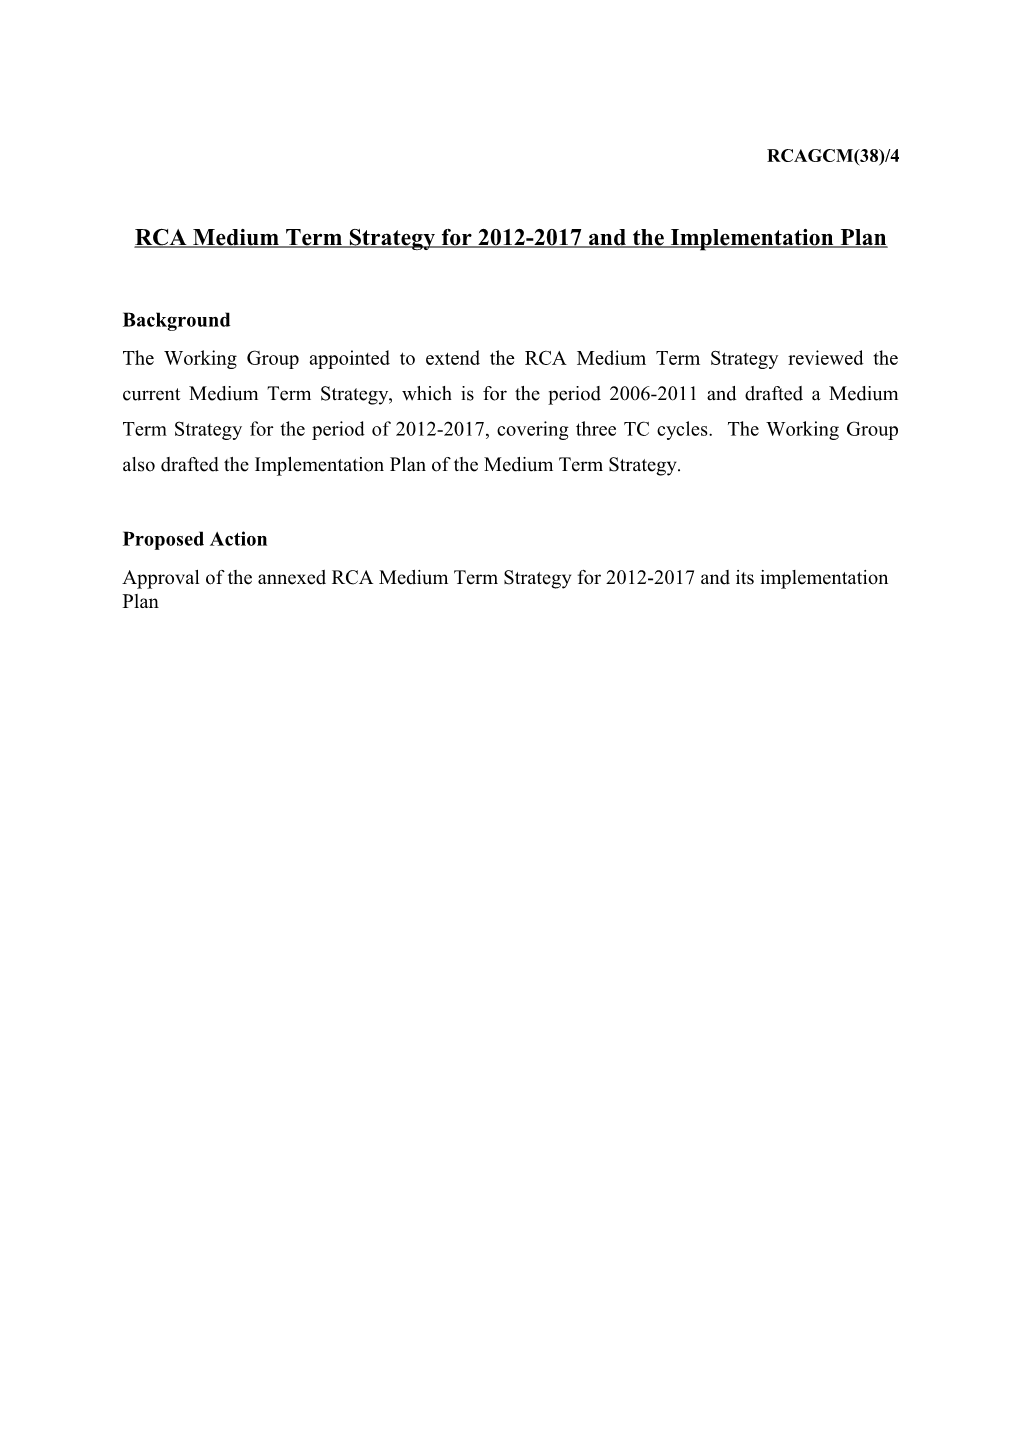 RCA Medium Term Strategy for 2012-2017 and the Implementation Plan